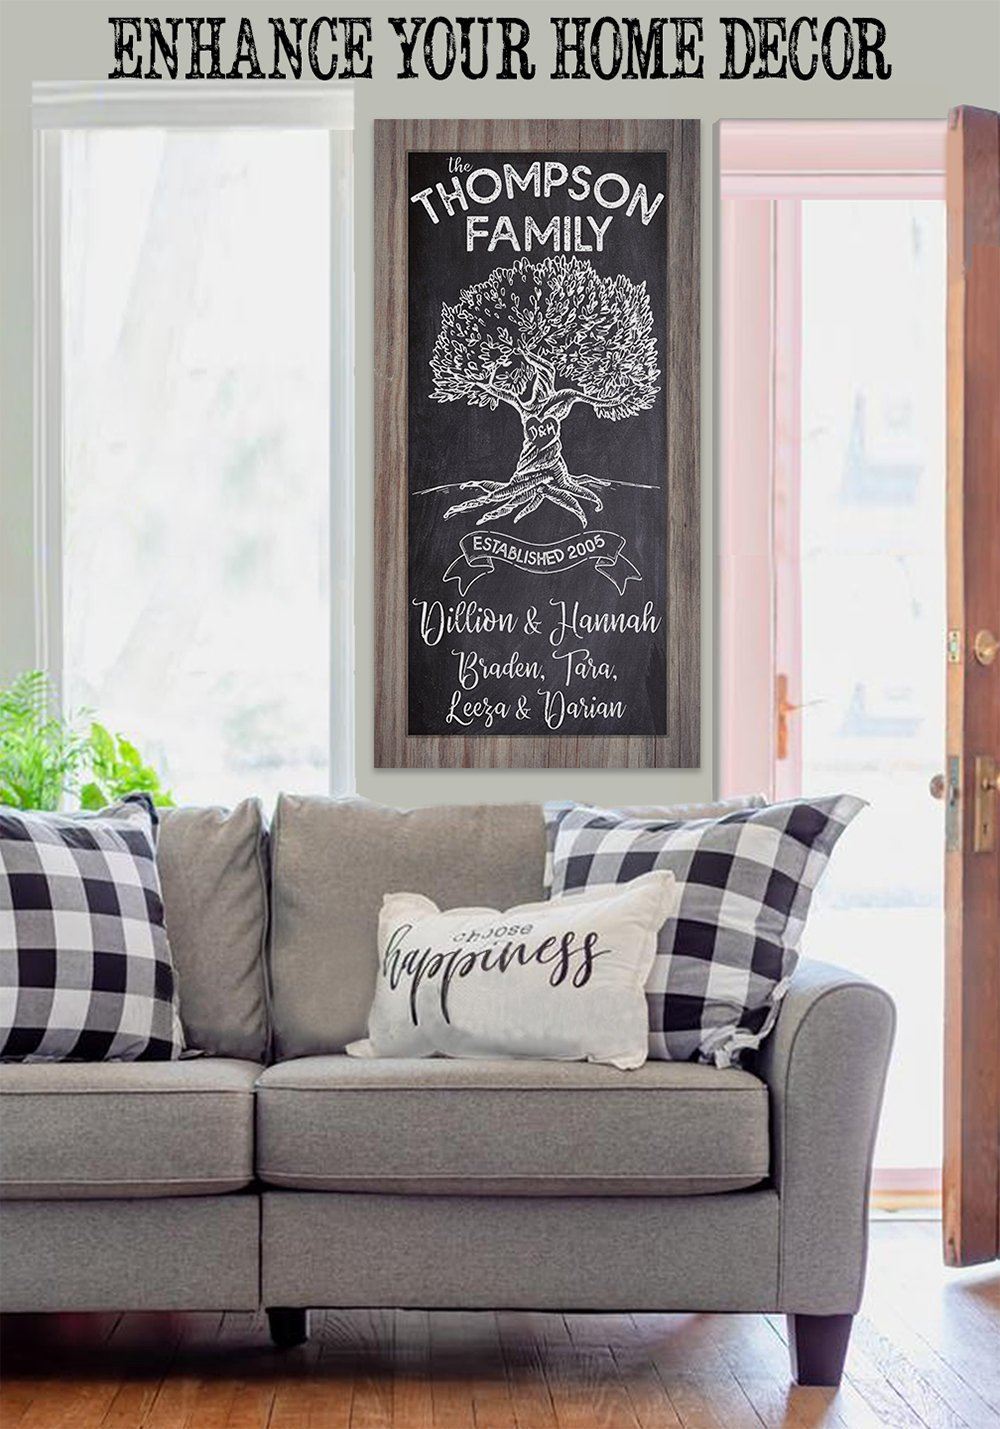 Personalized - Old Family Tree - Canvas | Lone Star Art.